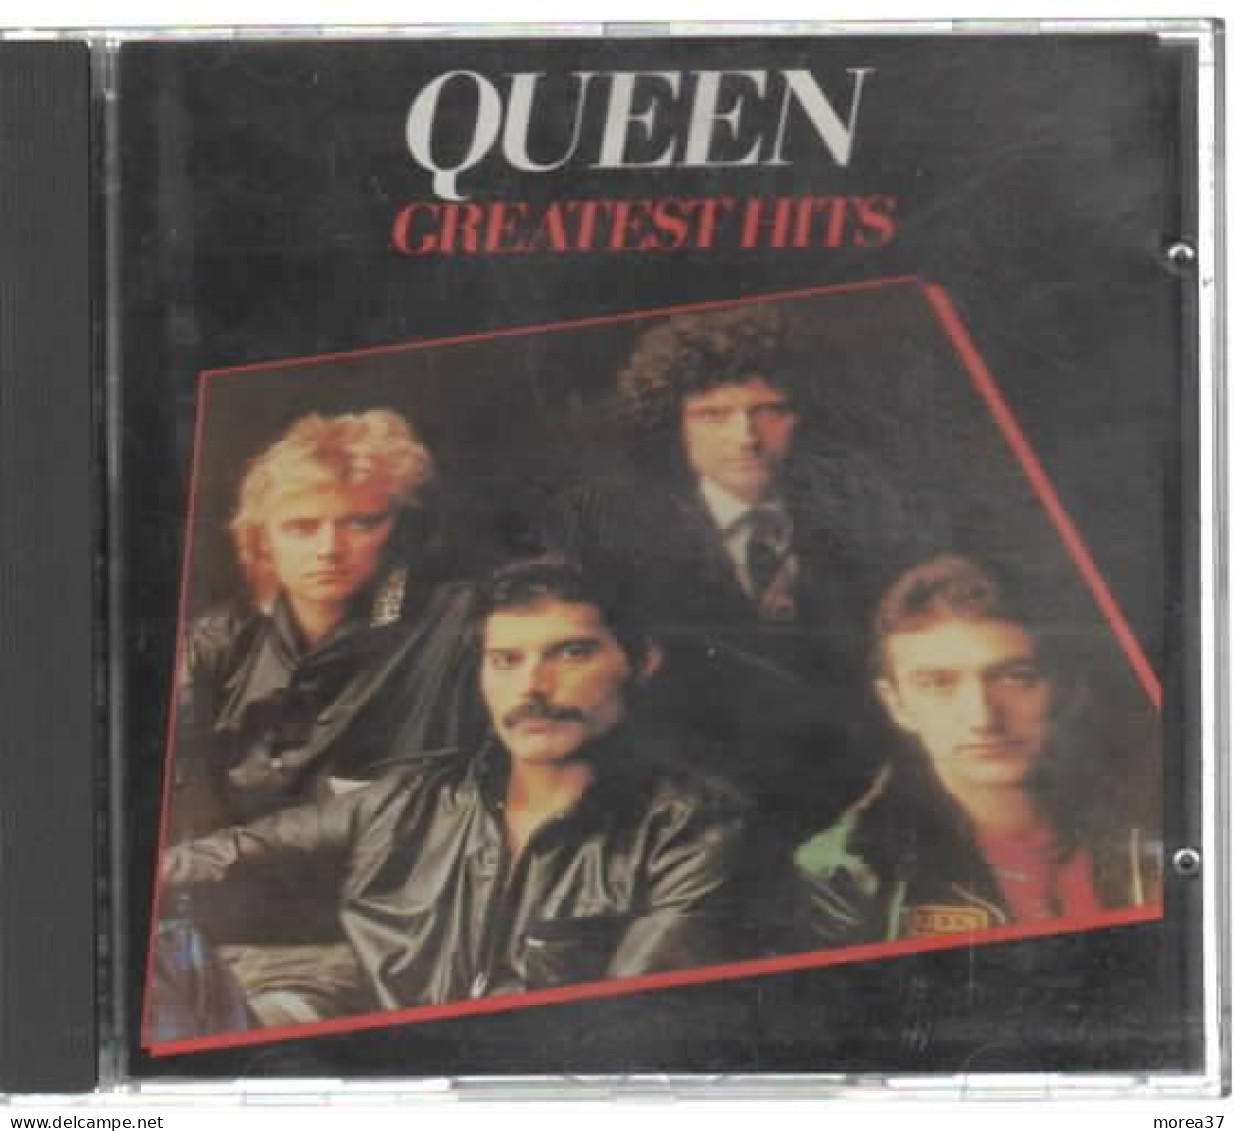 QUEEN Greatest Hits - Other - English Music